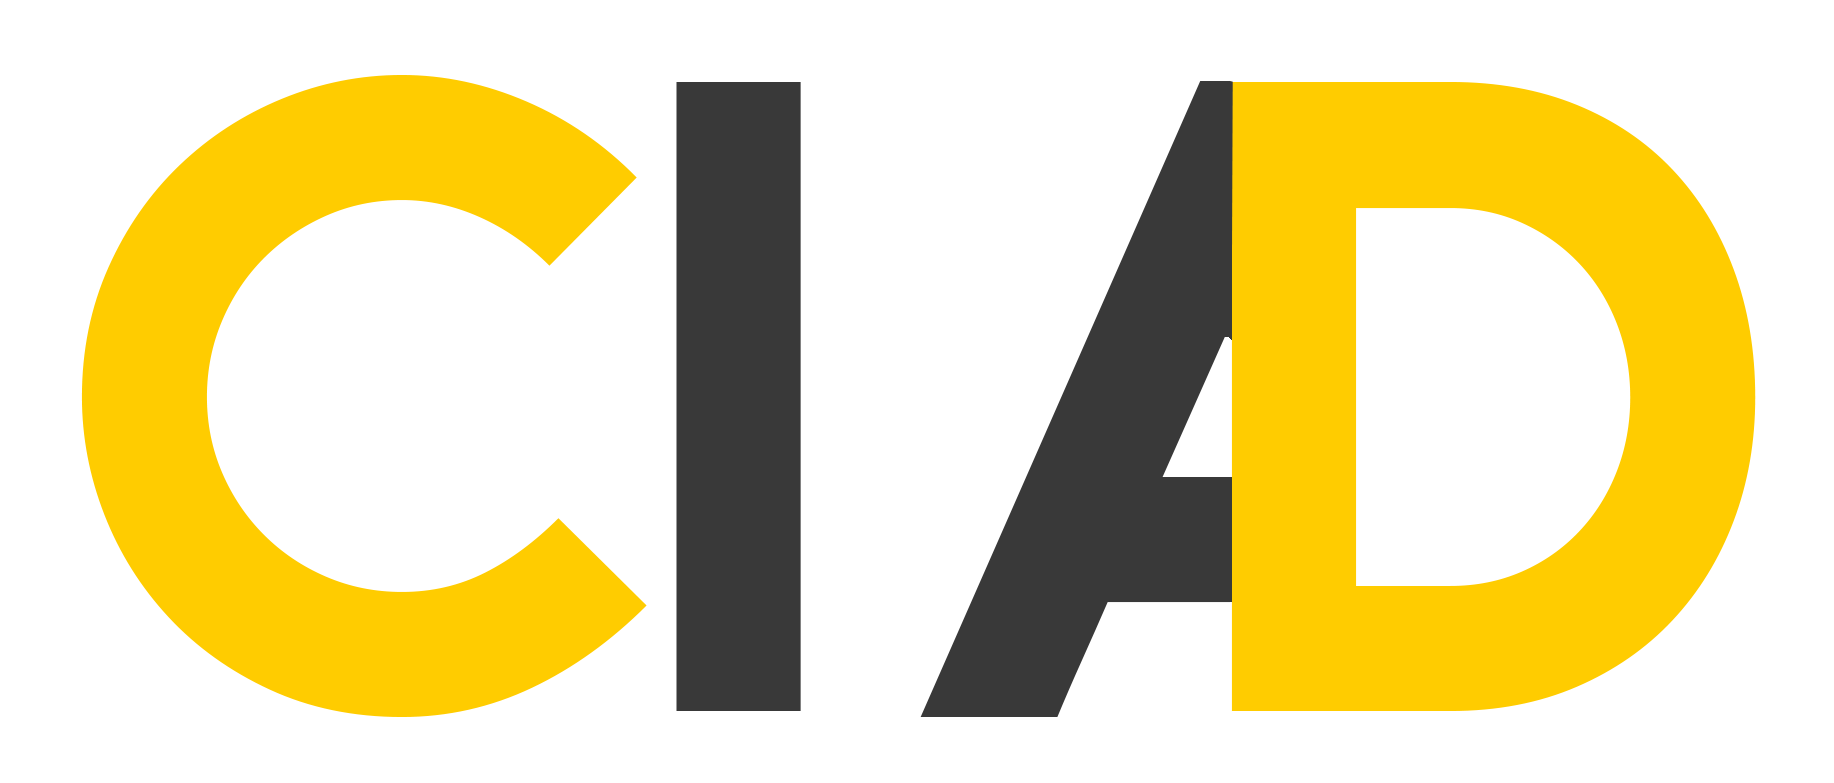 the letter c is yellow and the letter d is white .